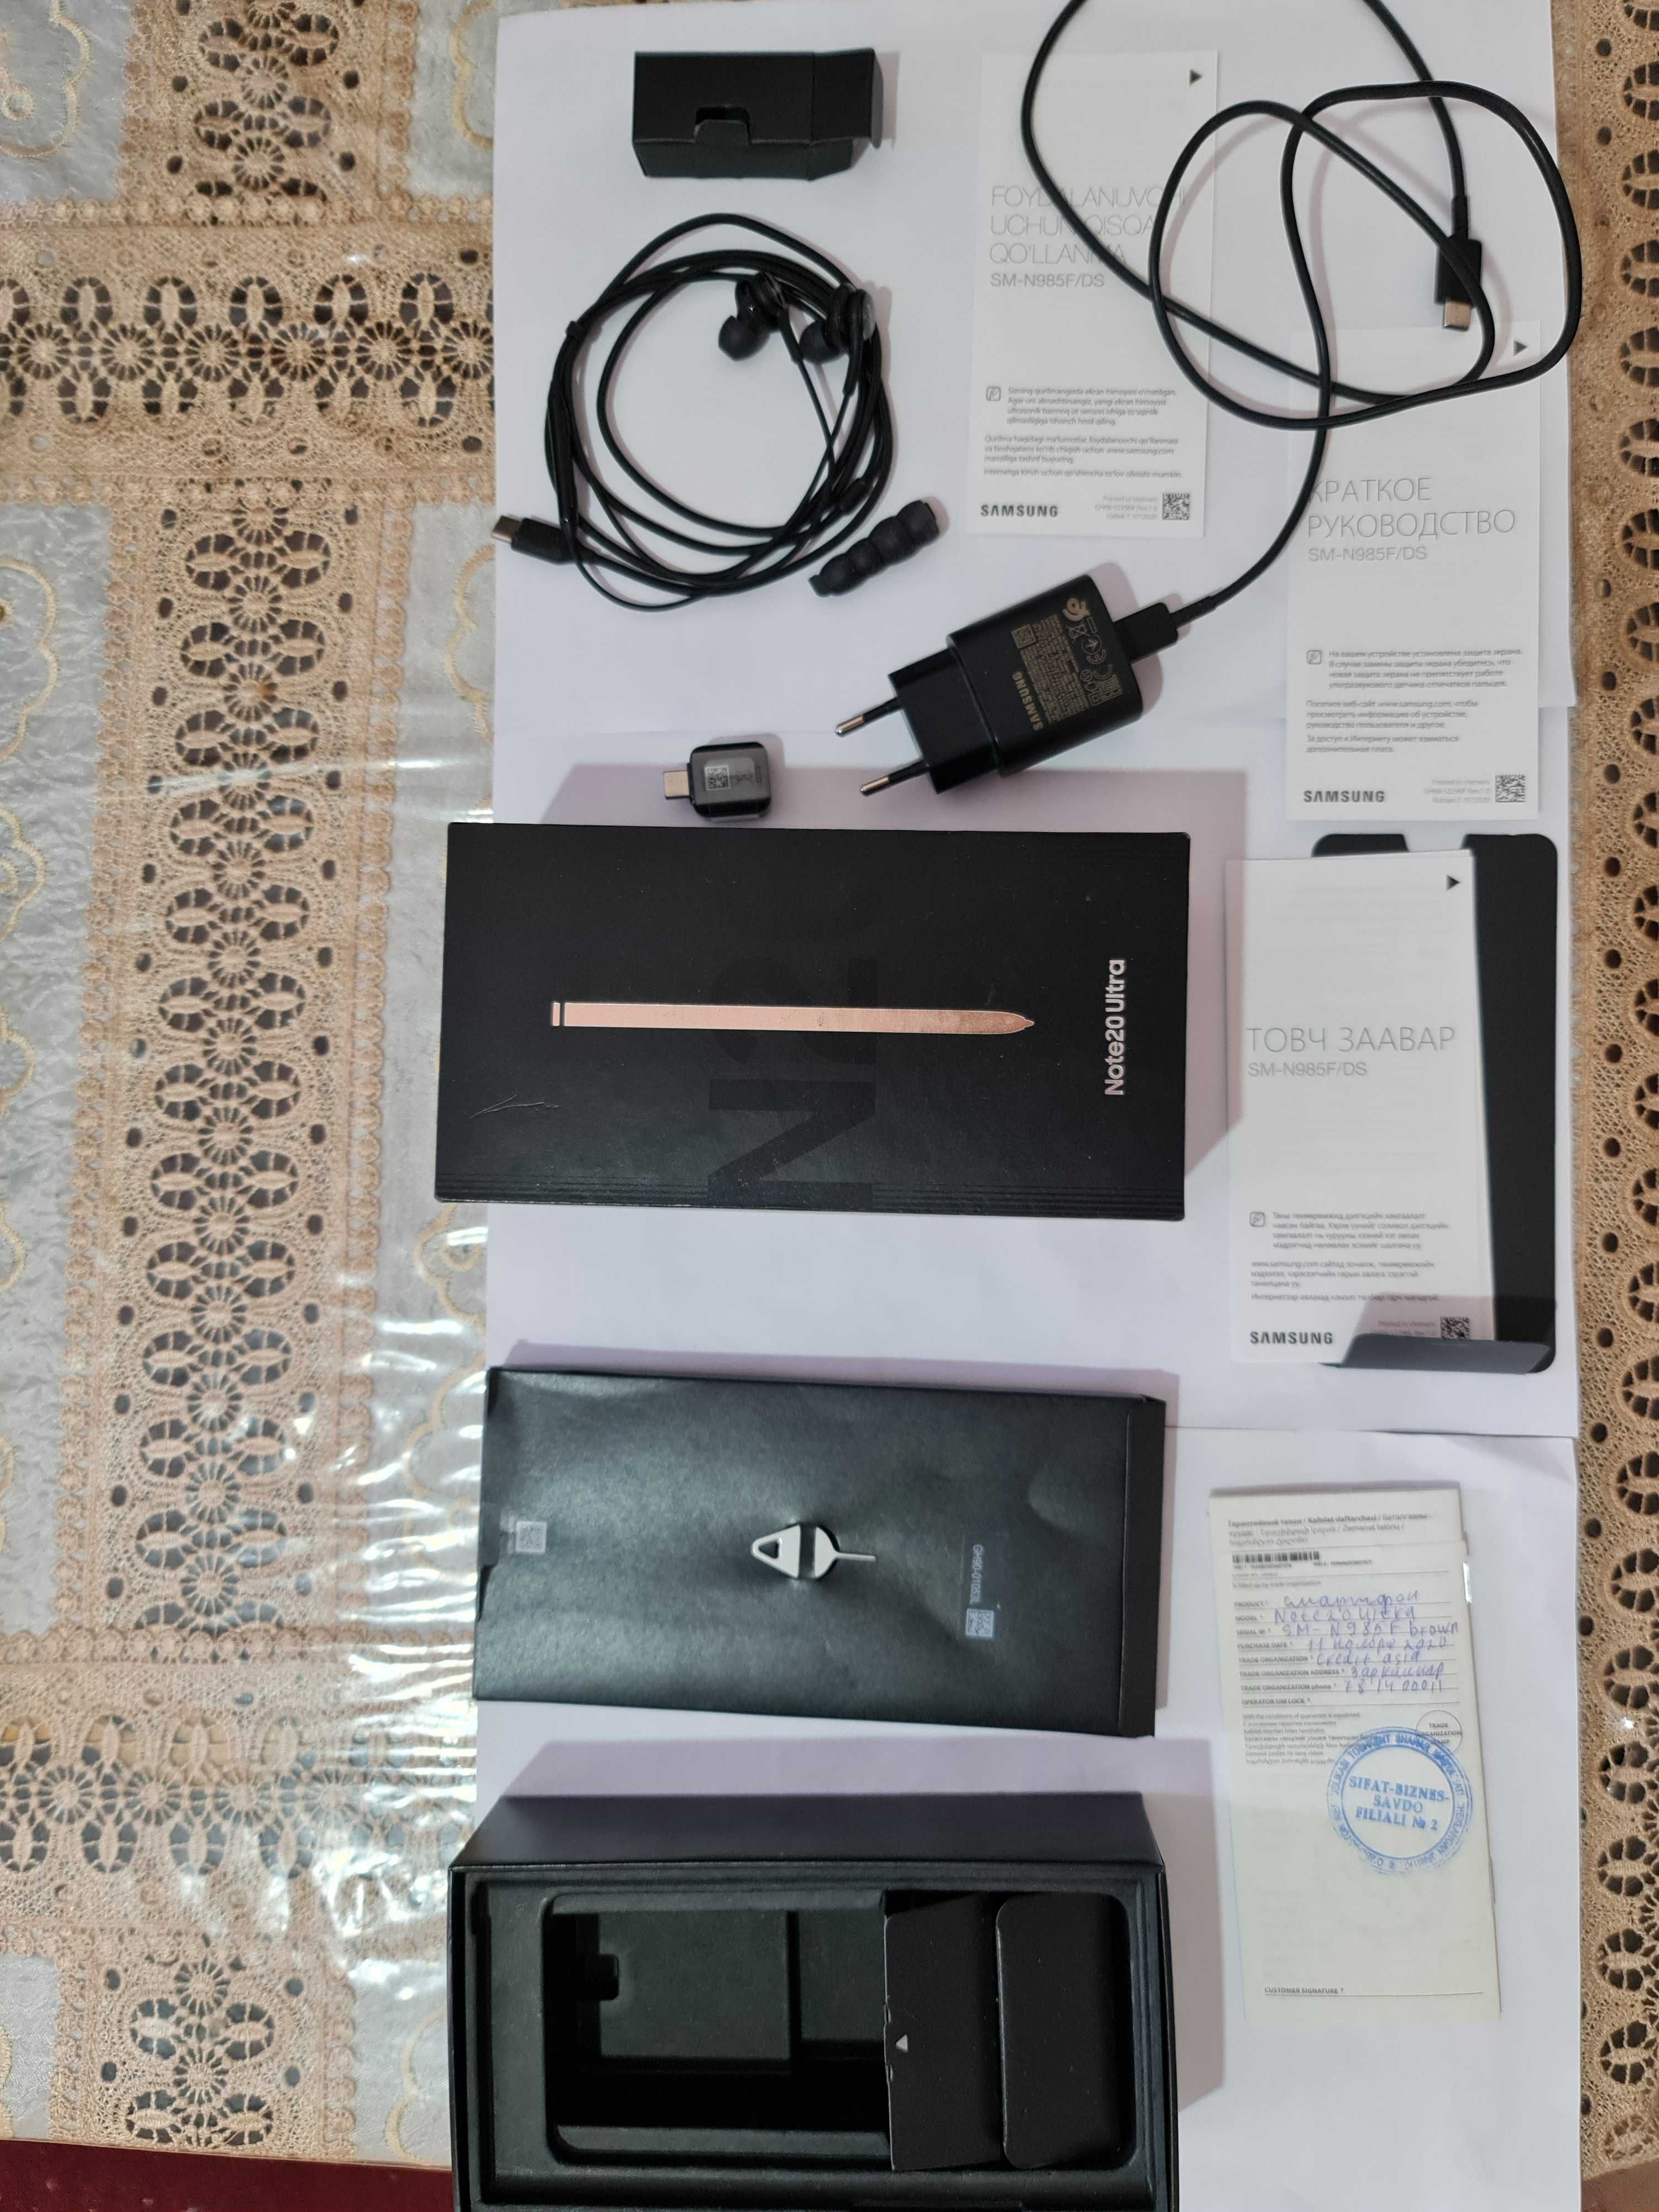 LG Acer Samsung note 20 ultra